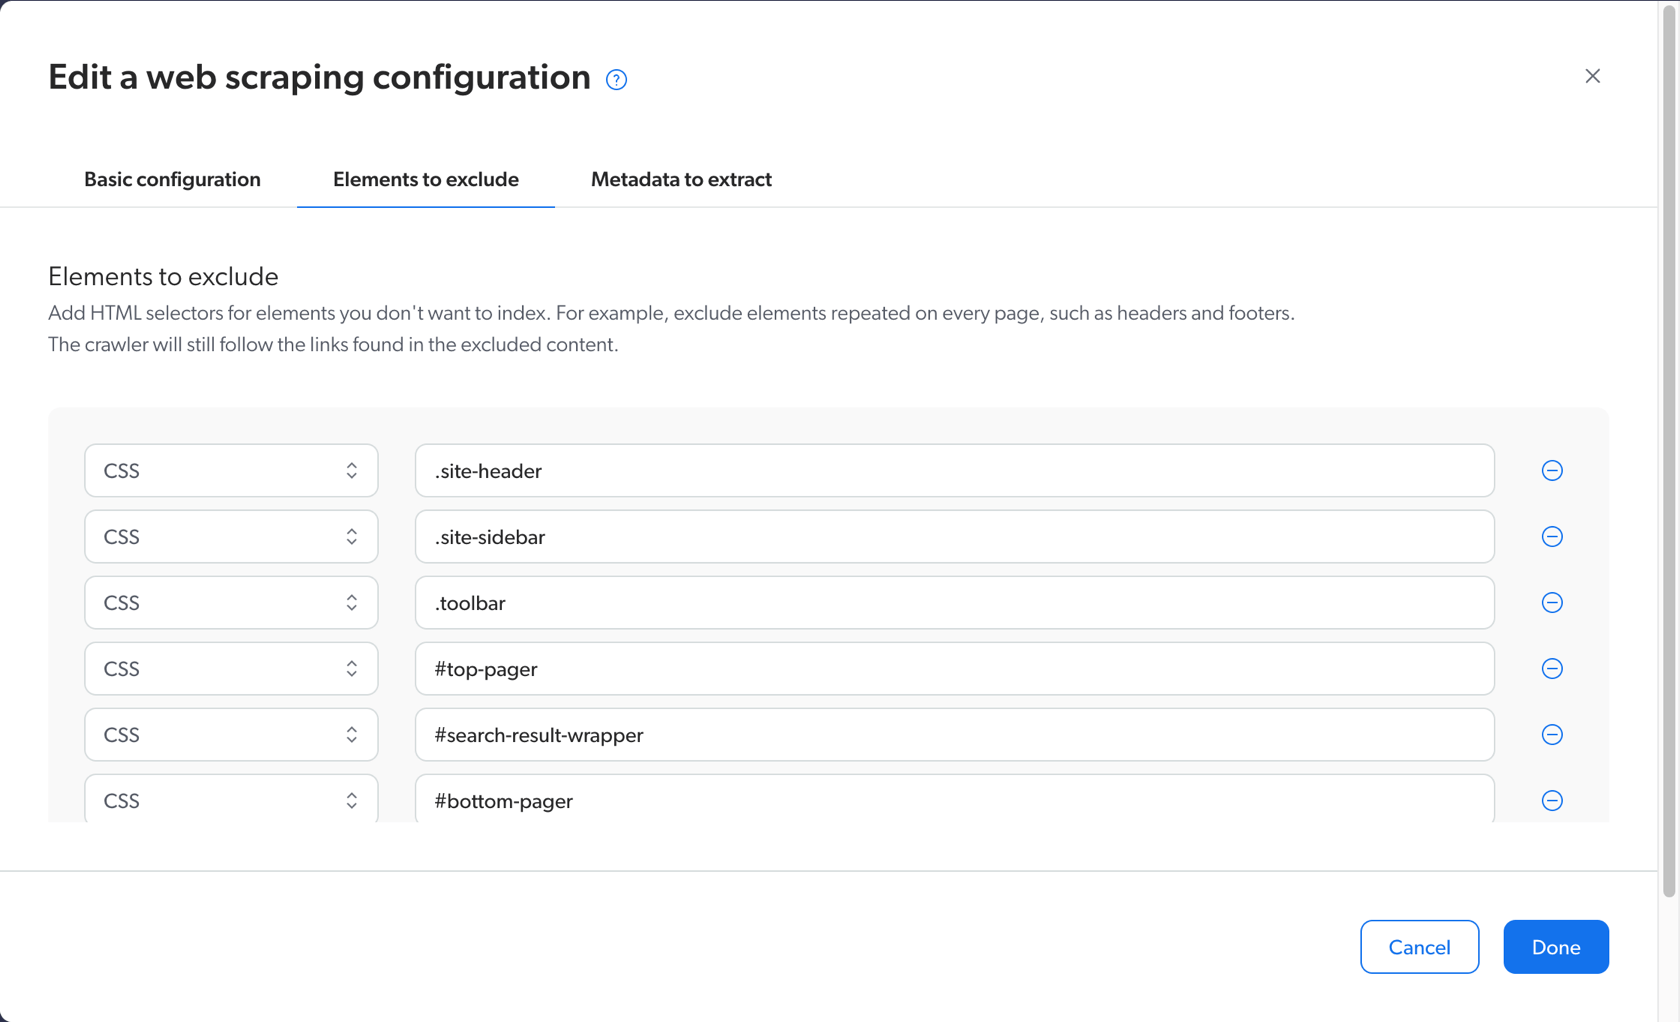 Edit a web scraping configuration page in Coveo. There is a column of dropdown fields on the left and they are all set to CSS. Next to each dropdown field is a field name and it contains the name of an element.